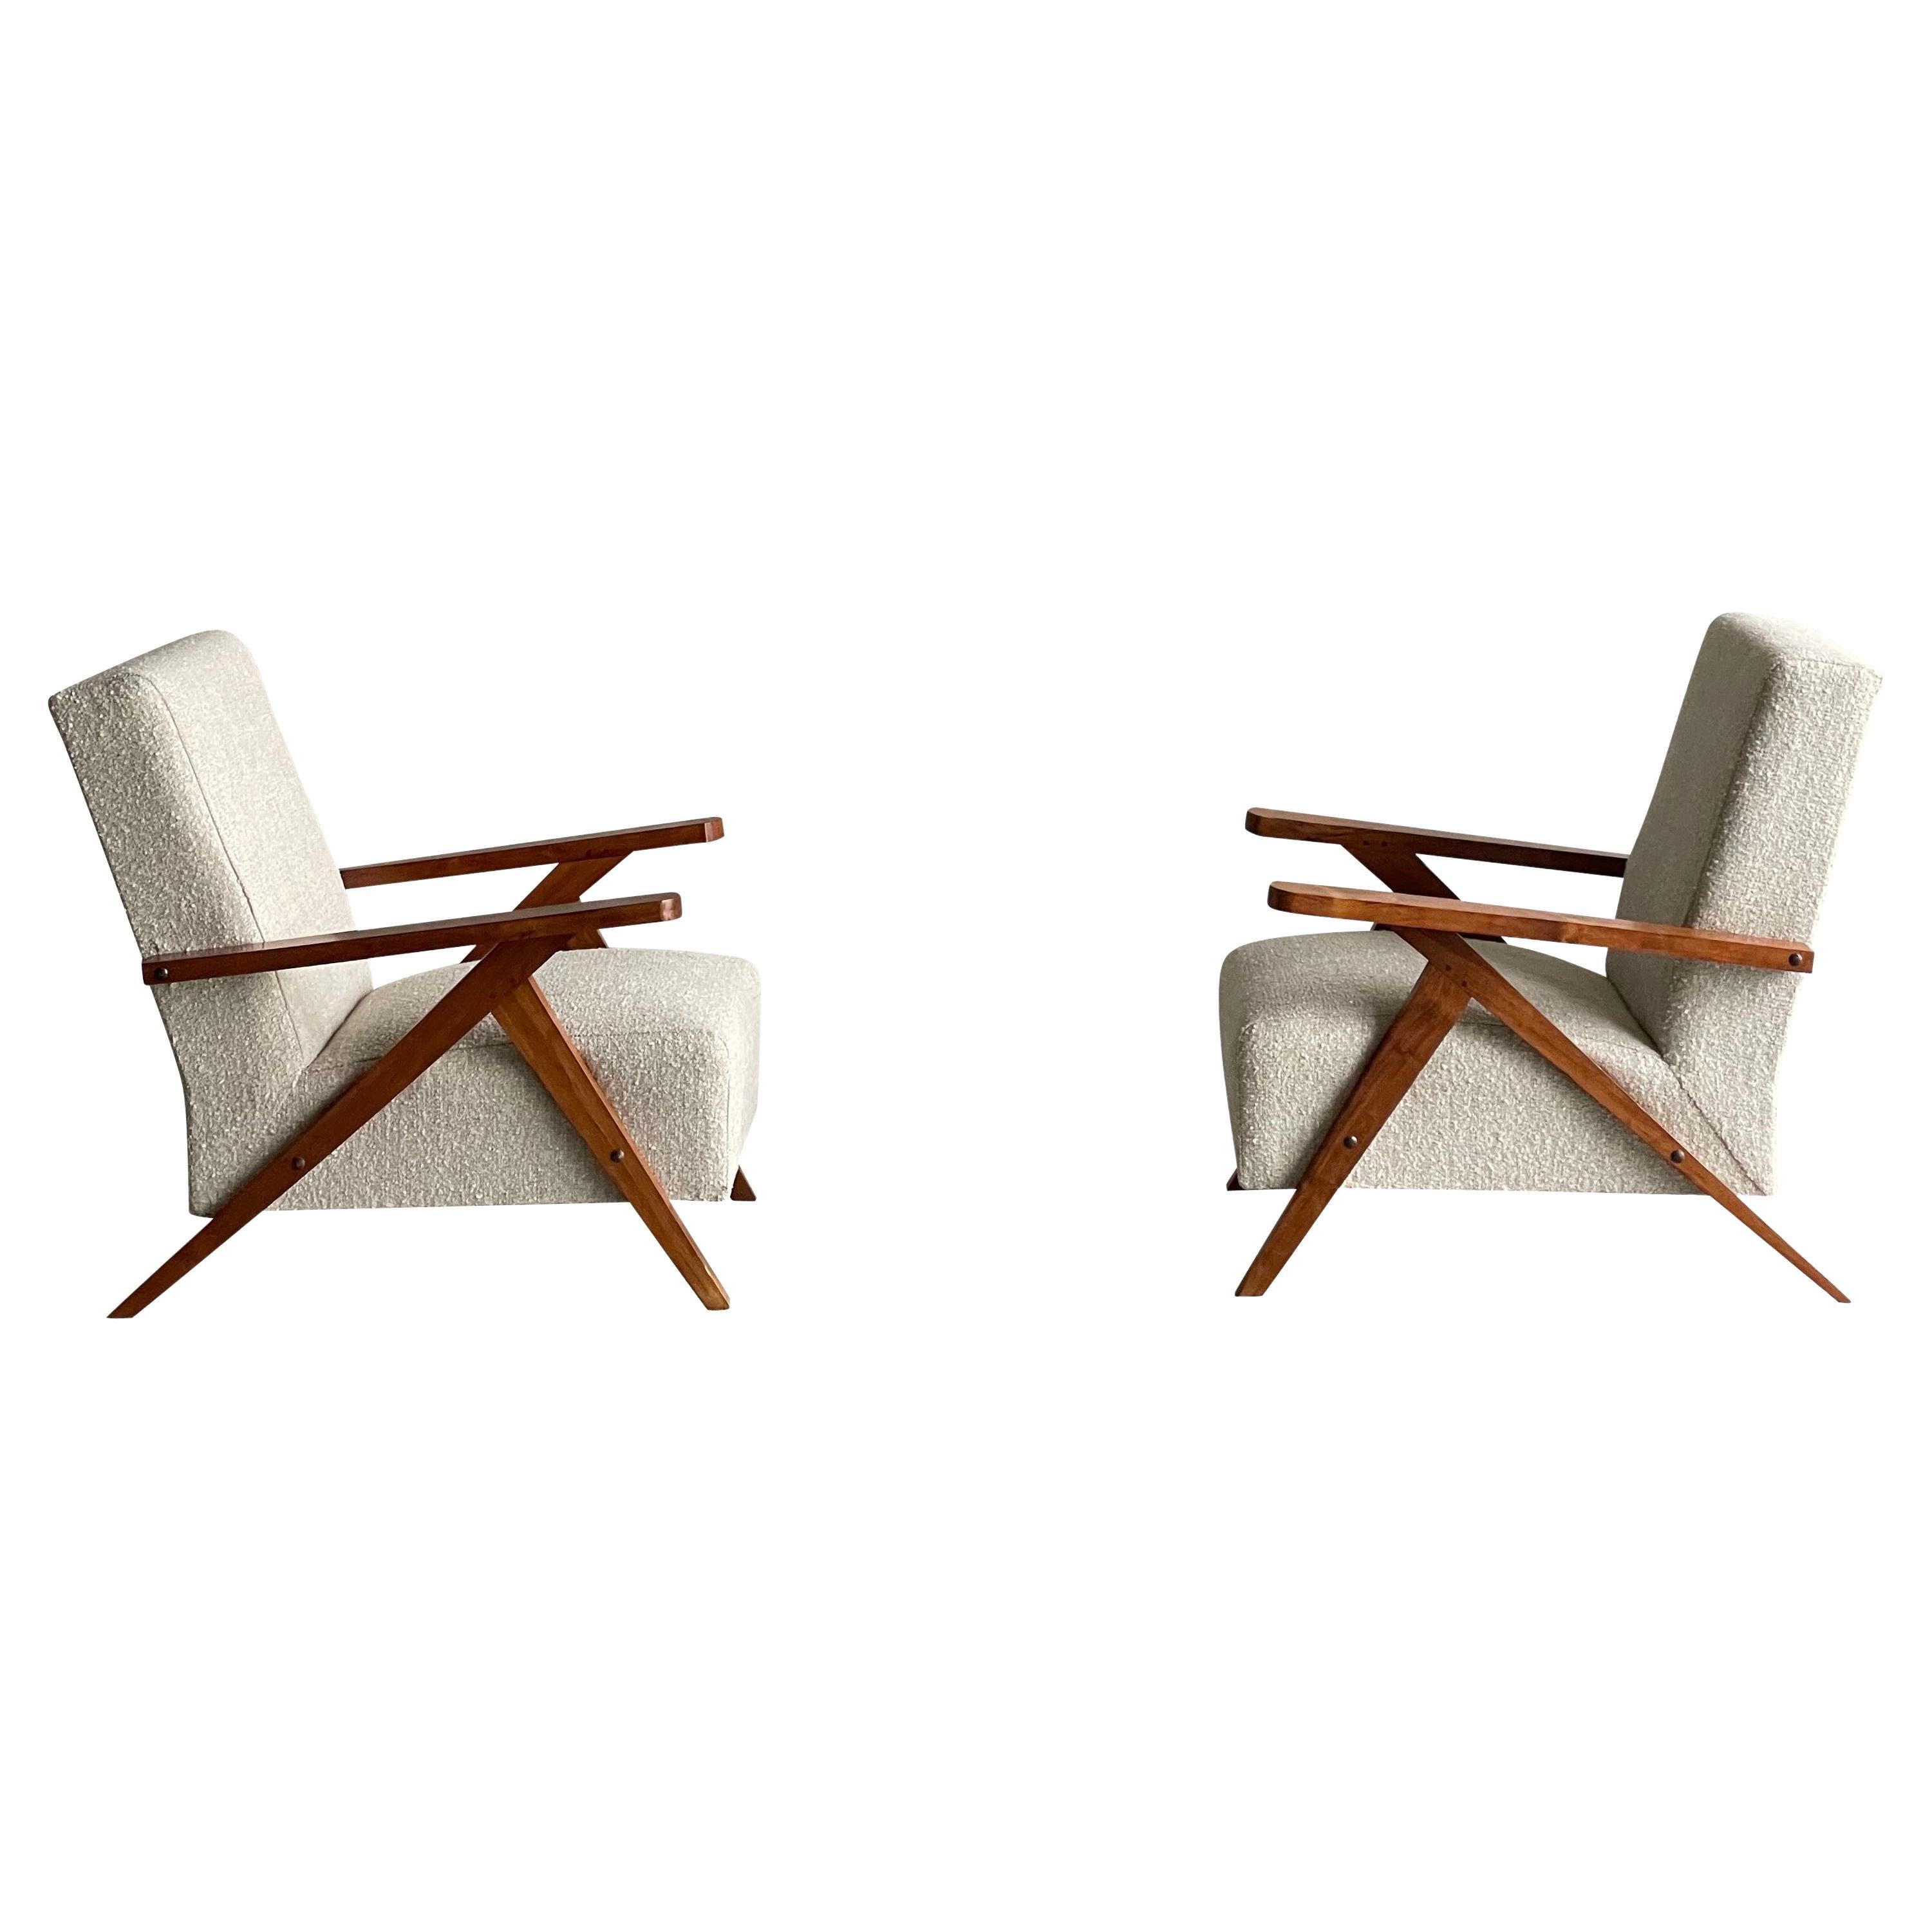 Pair Compass Leg Upholstered Chairs, France, 1940s